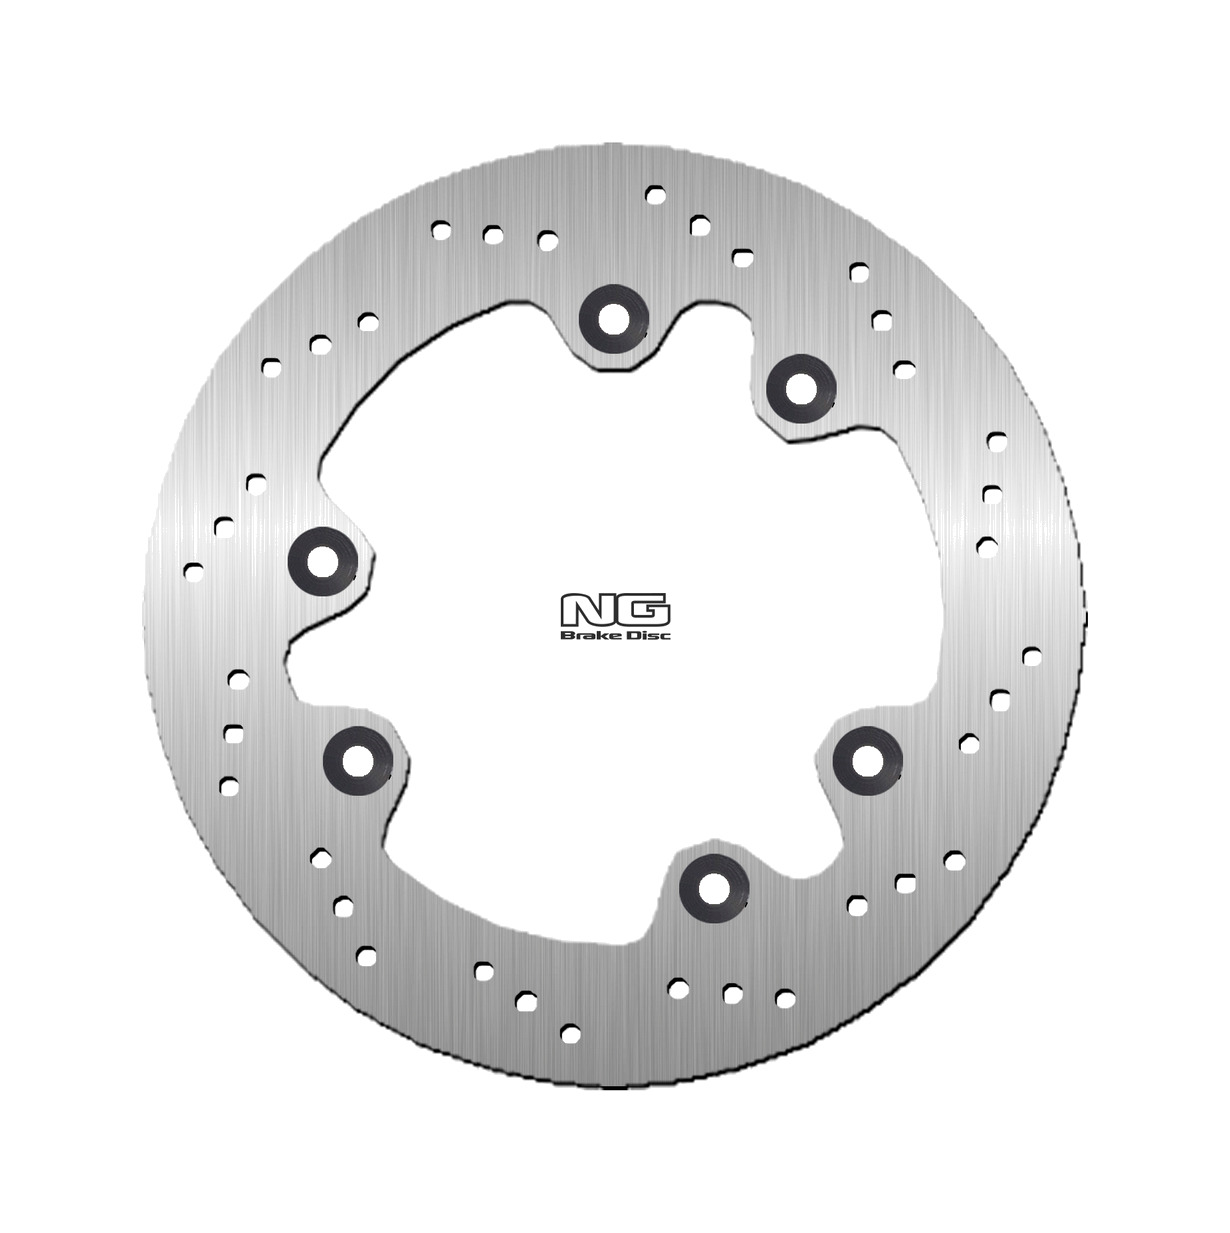 15431 - NG BRAKE DISK REMSCHIJF - Picture 1 of 1